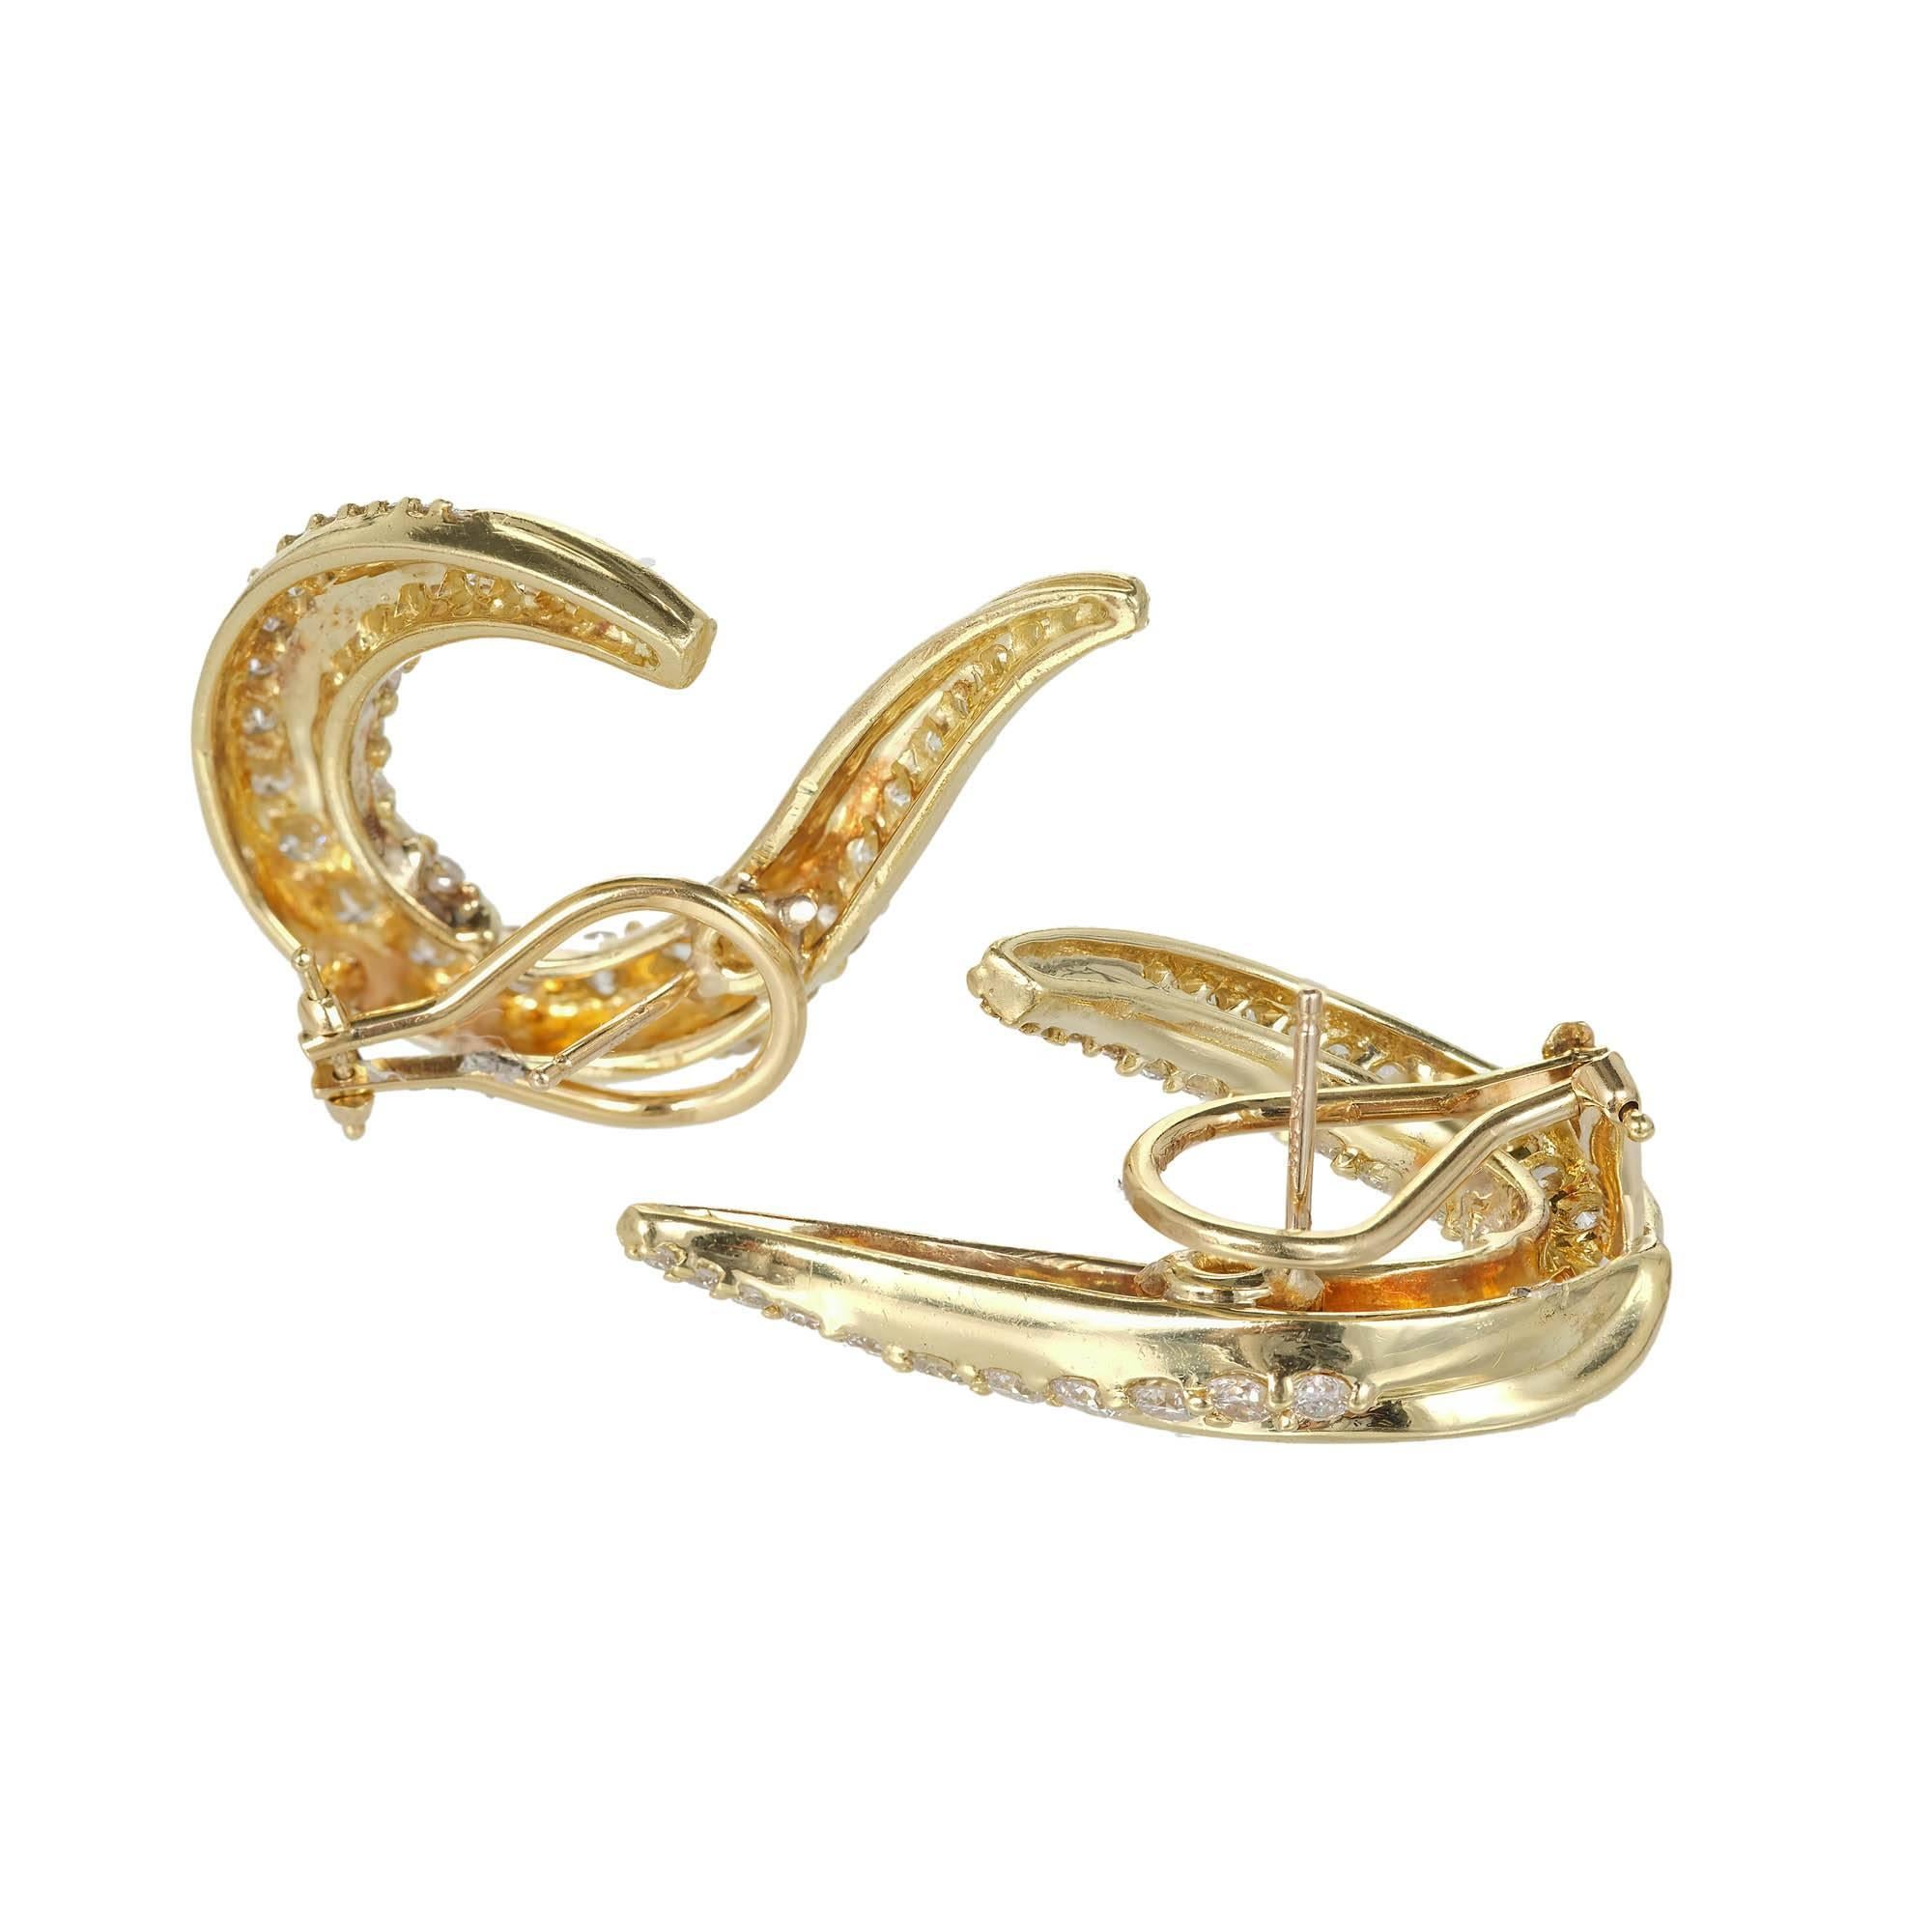 Robin Rotenier 2.50 Carat Diamond Yellow Gold Swirl Clip Post Earrings In Excellent Condition For Sale In Stamford, CT